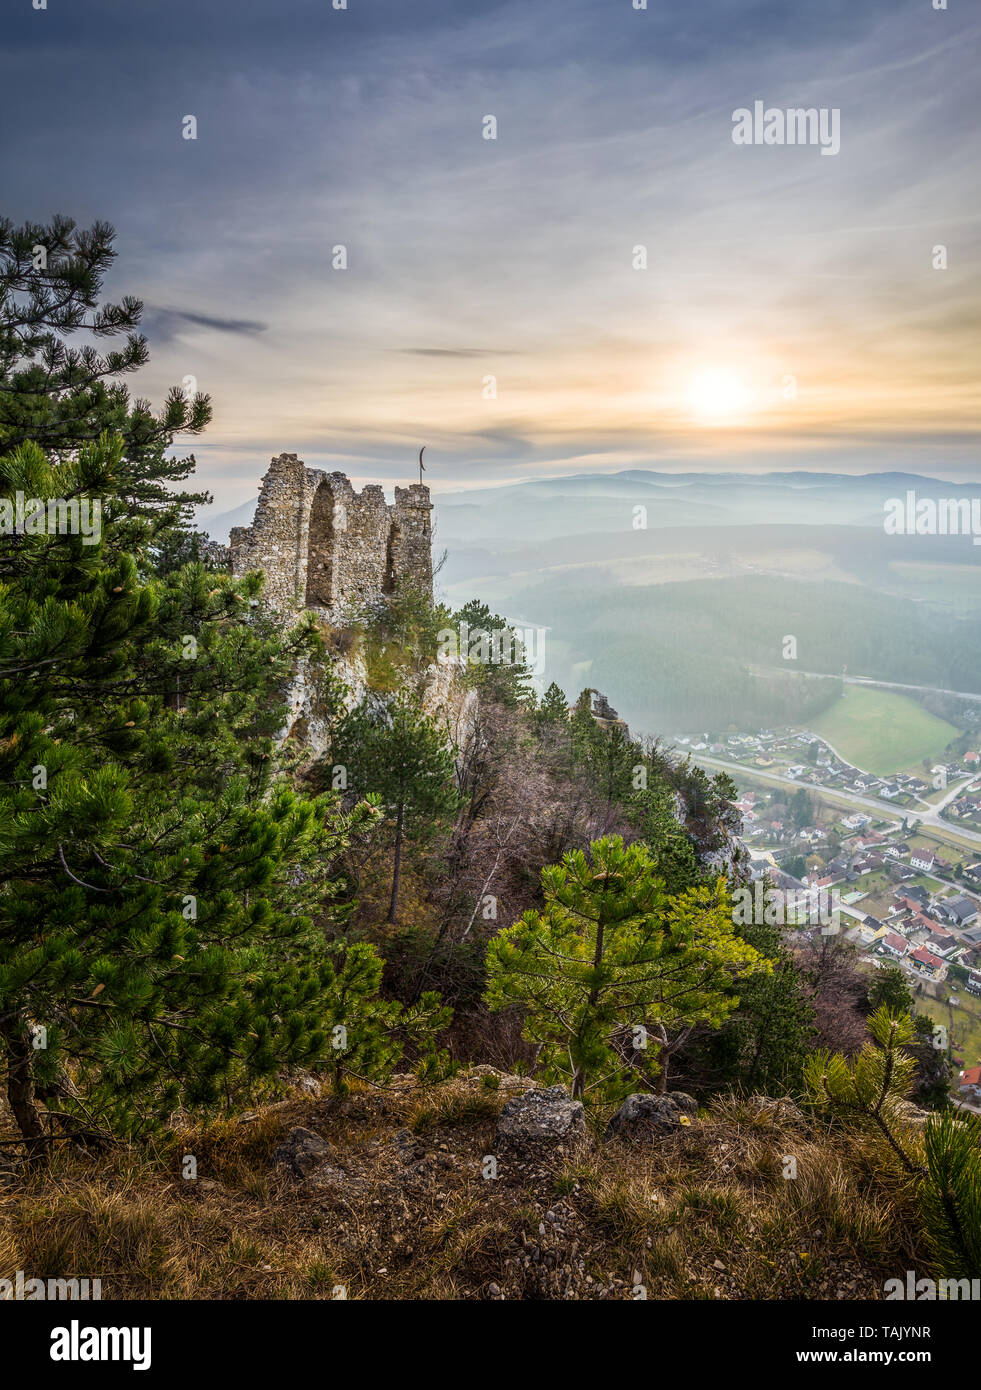 Ruins of a Castle on a Rockface in Gleissenfeld, Austria with Mountains and Village in Background. Located in Nature Park Seebenstein-Turkensturz. Stock Photo